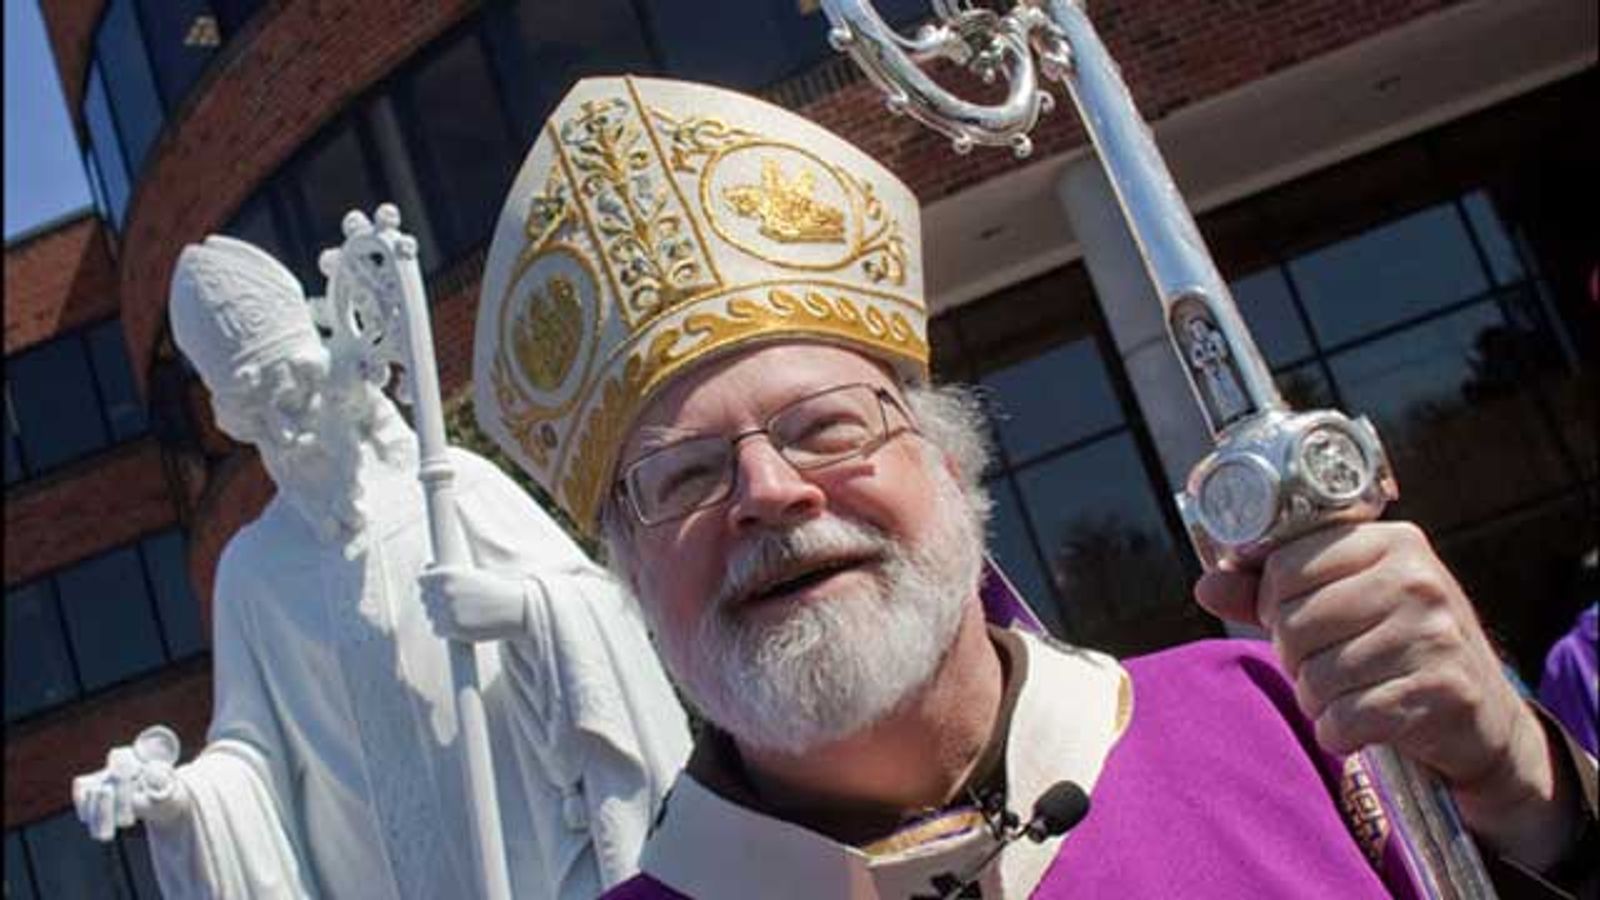 Cardinal Sean O’Malley Prays for the Deaths of Women